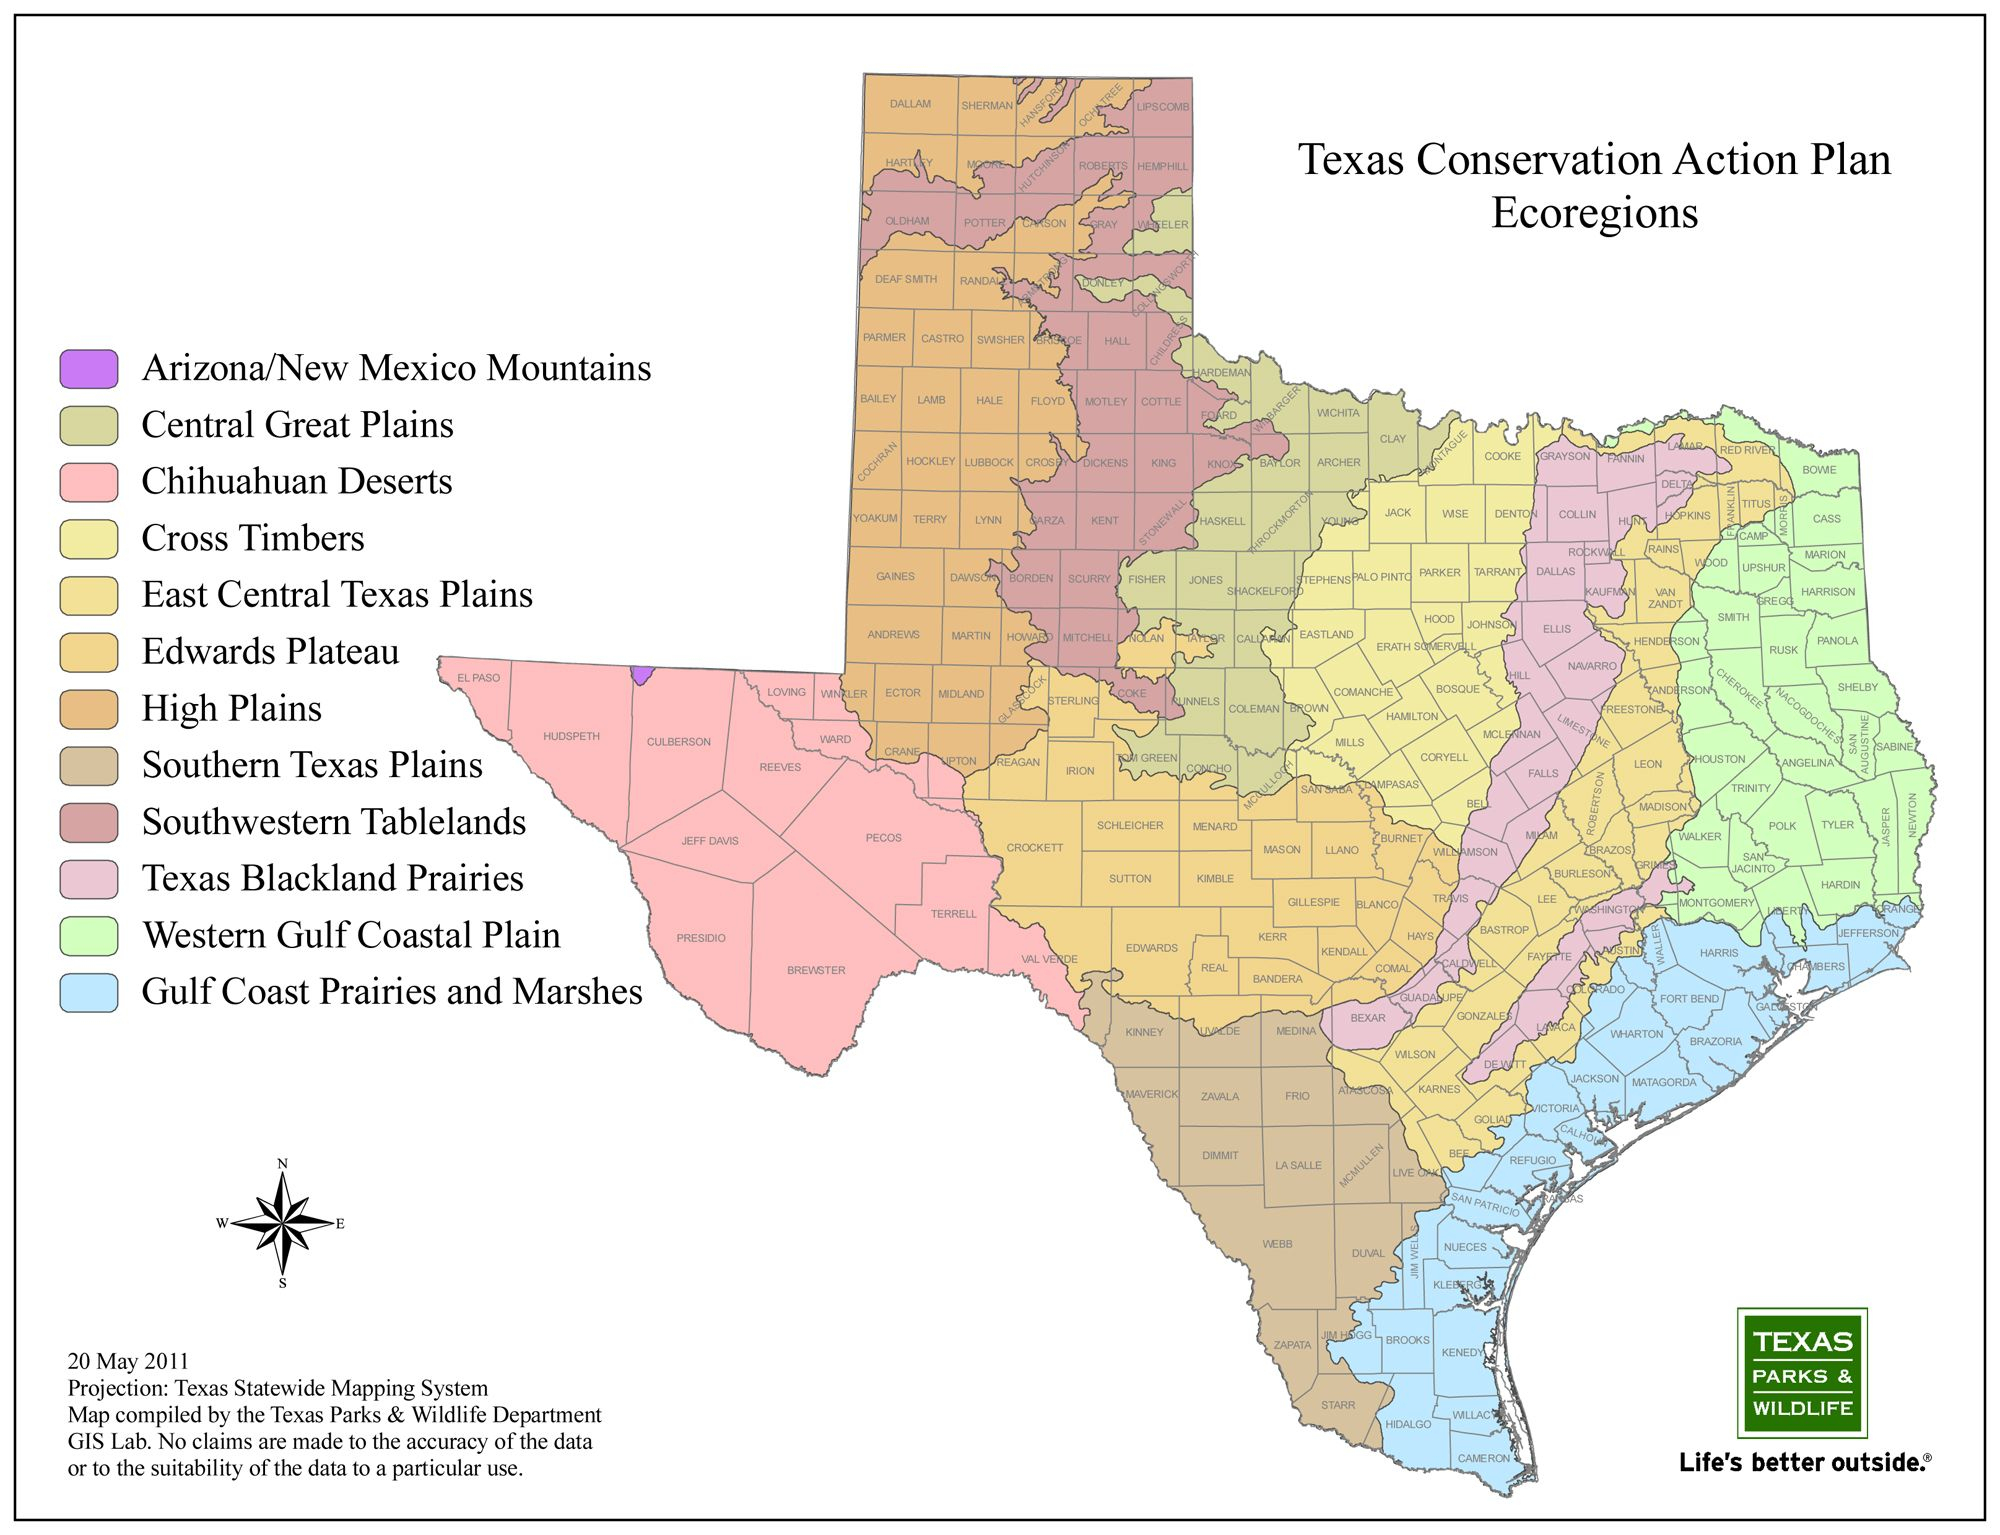 Texas Ecoregions Map From Texas Parks And Wildlife | Maps | Texas - Texas Parks And Wildlife Map